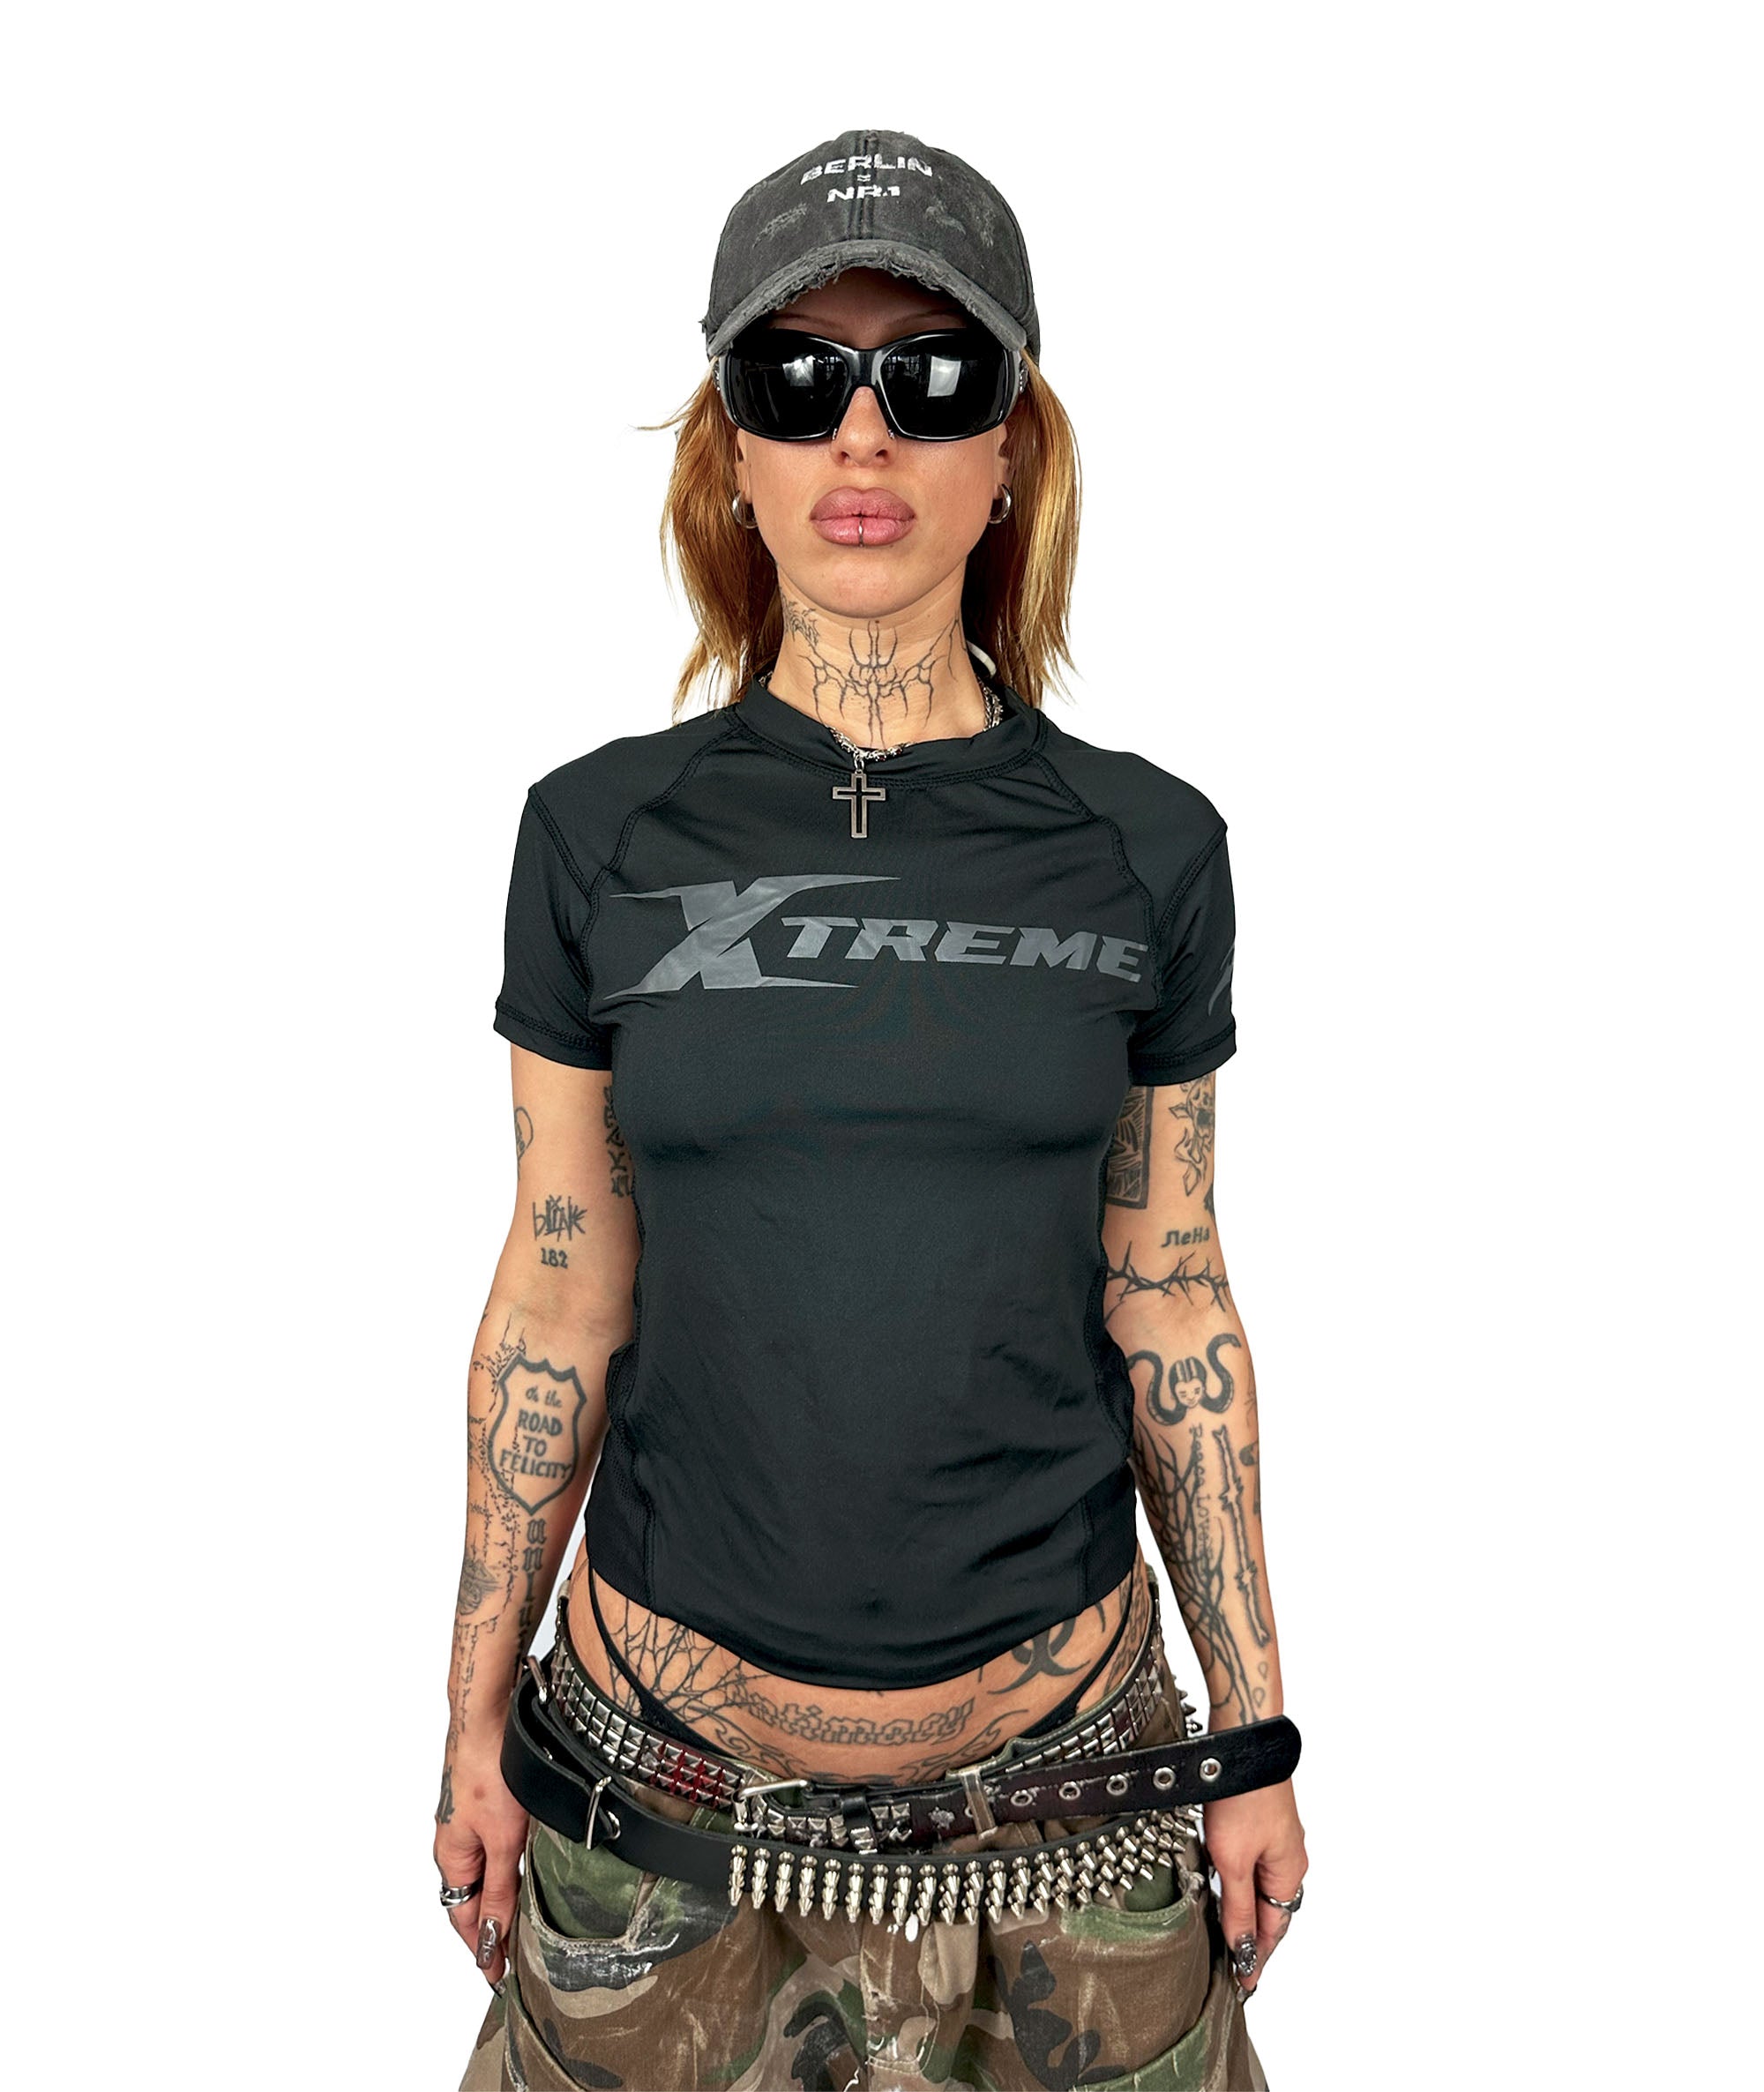 XTREME - FUNCTIONAL T-SHIRT | DRY-FIT, UNISEX